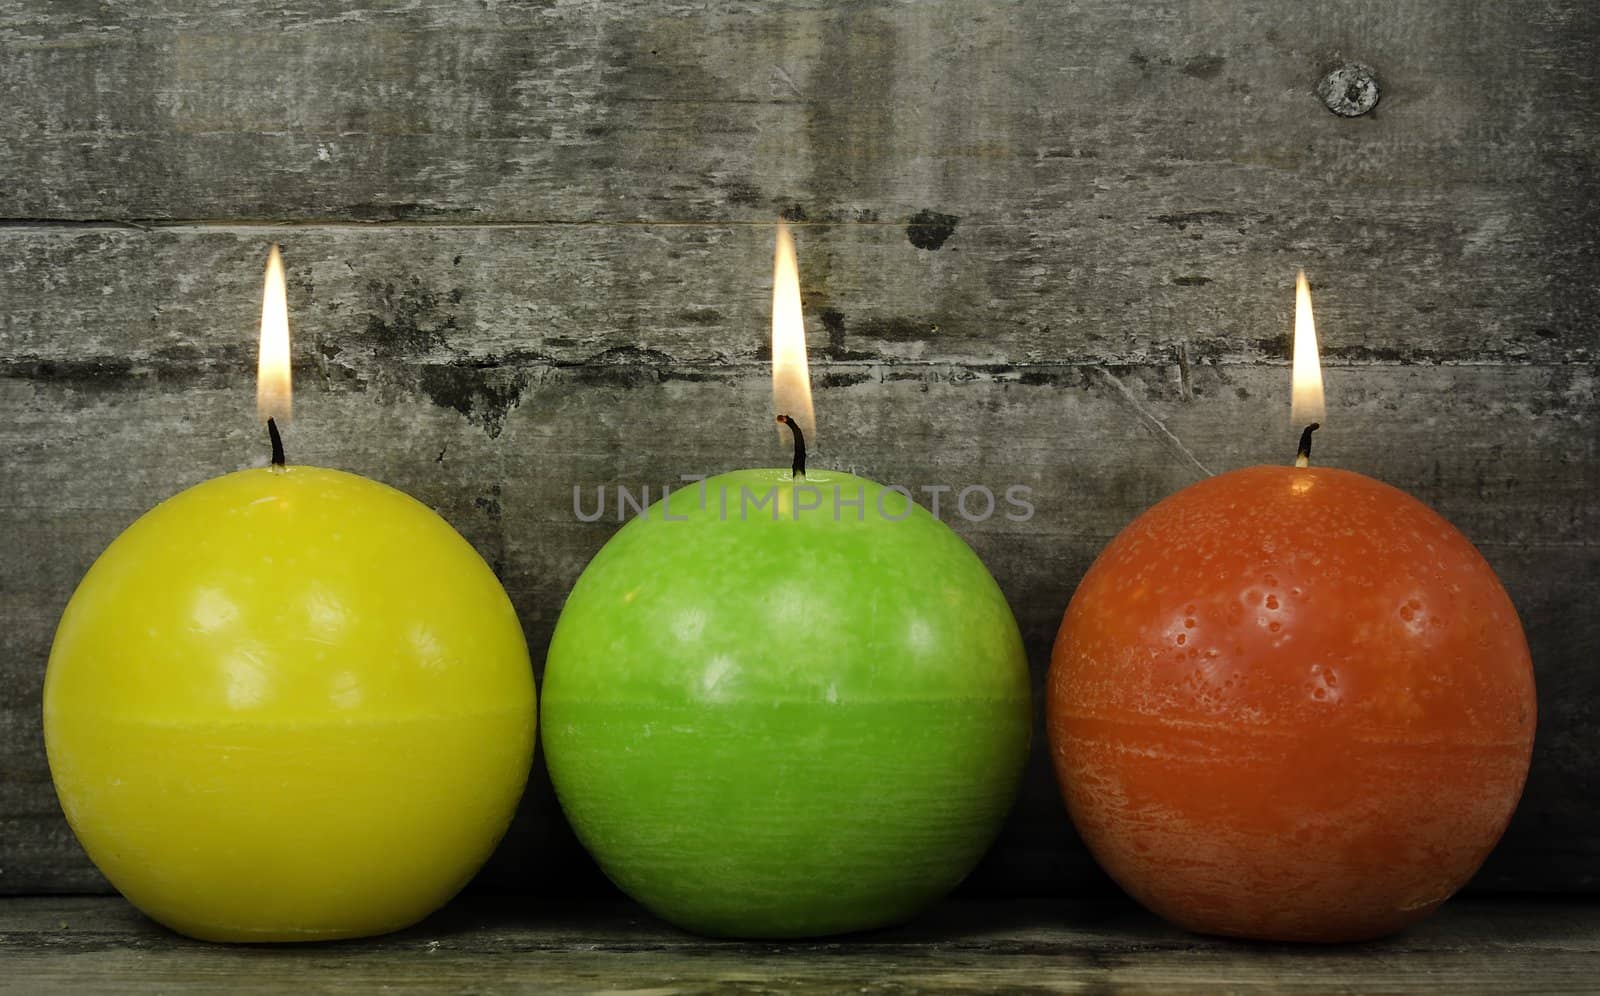 colored candles